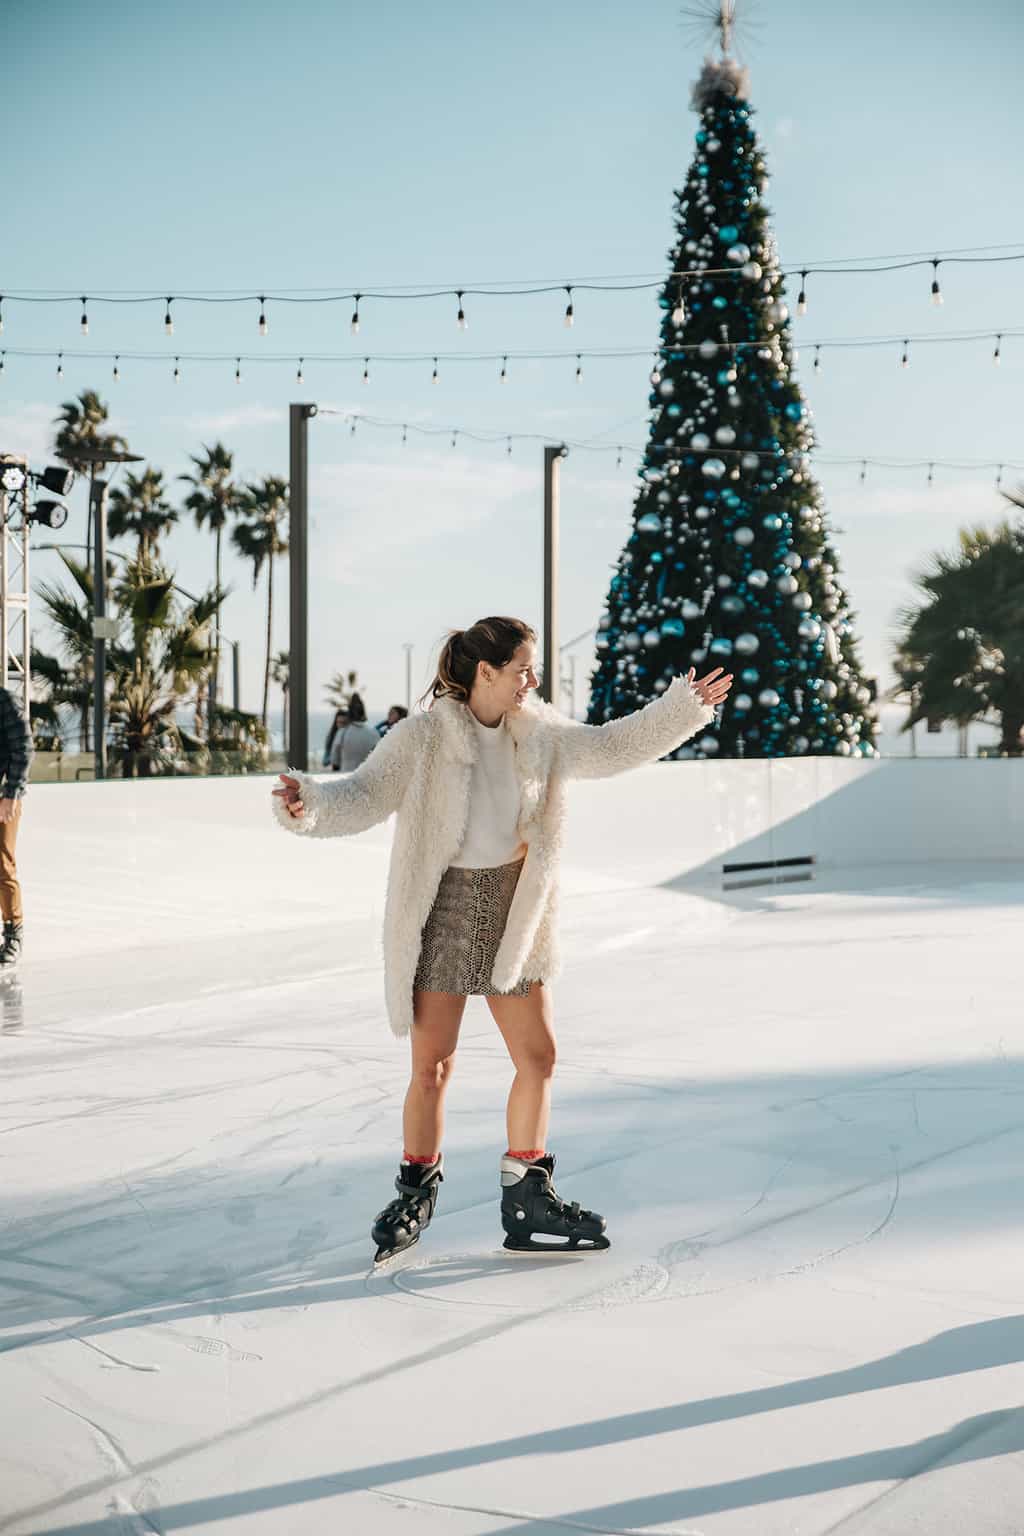 Ice skater twirling at the Ice Rink at Pasea Hotel and Spa in Huntington Beach CA during Christmas